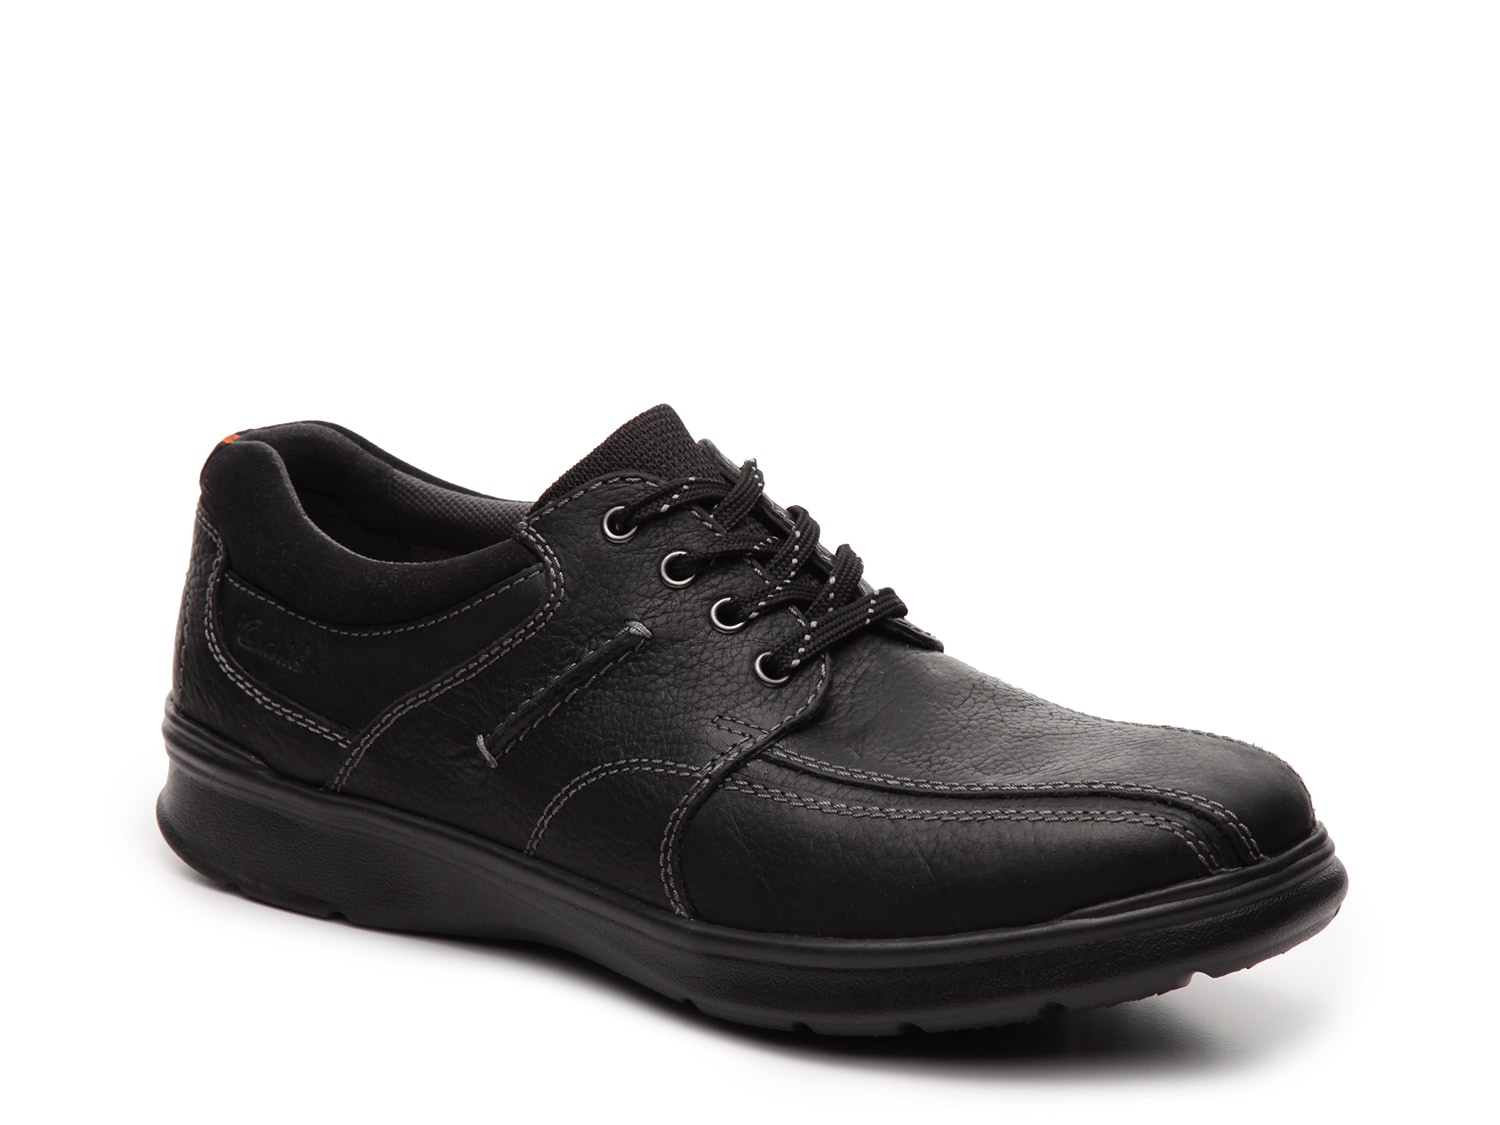 Clarks Cotrell Walk Oxford - Free Shipping | DSW